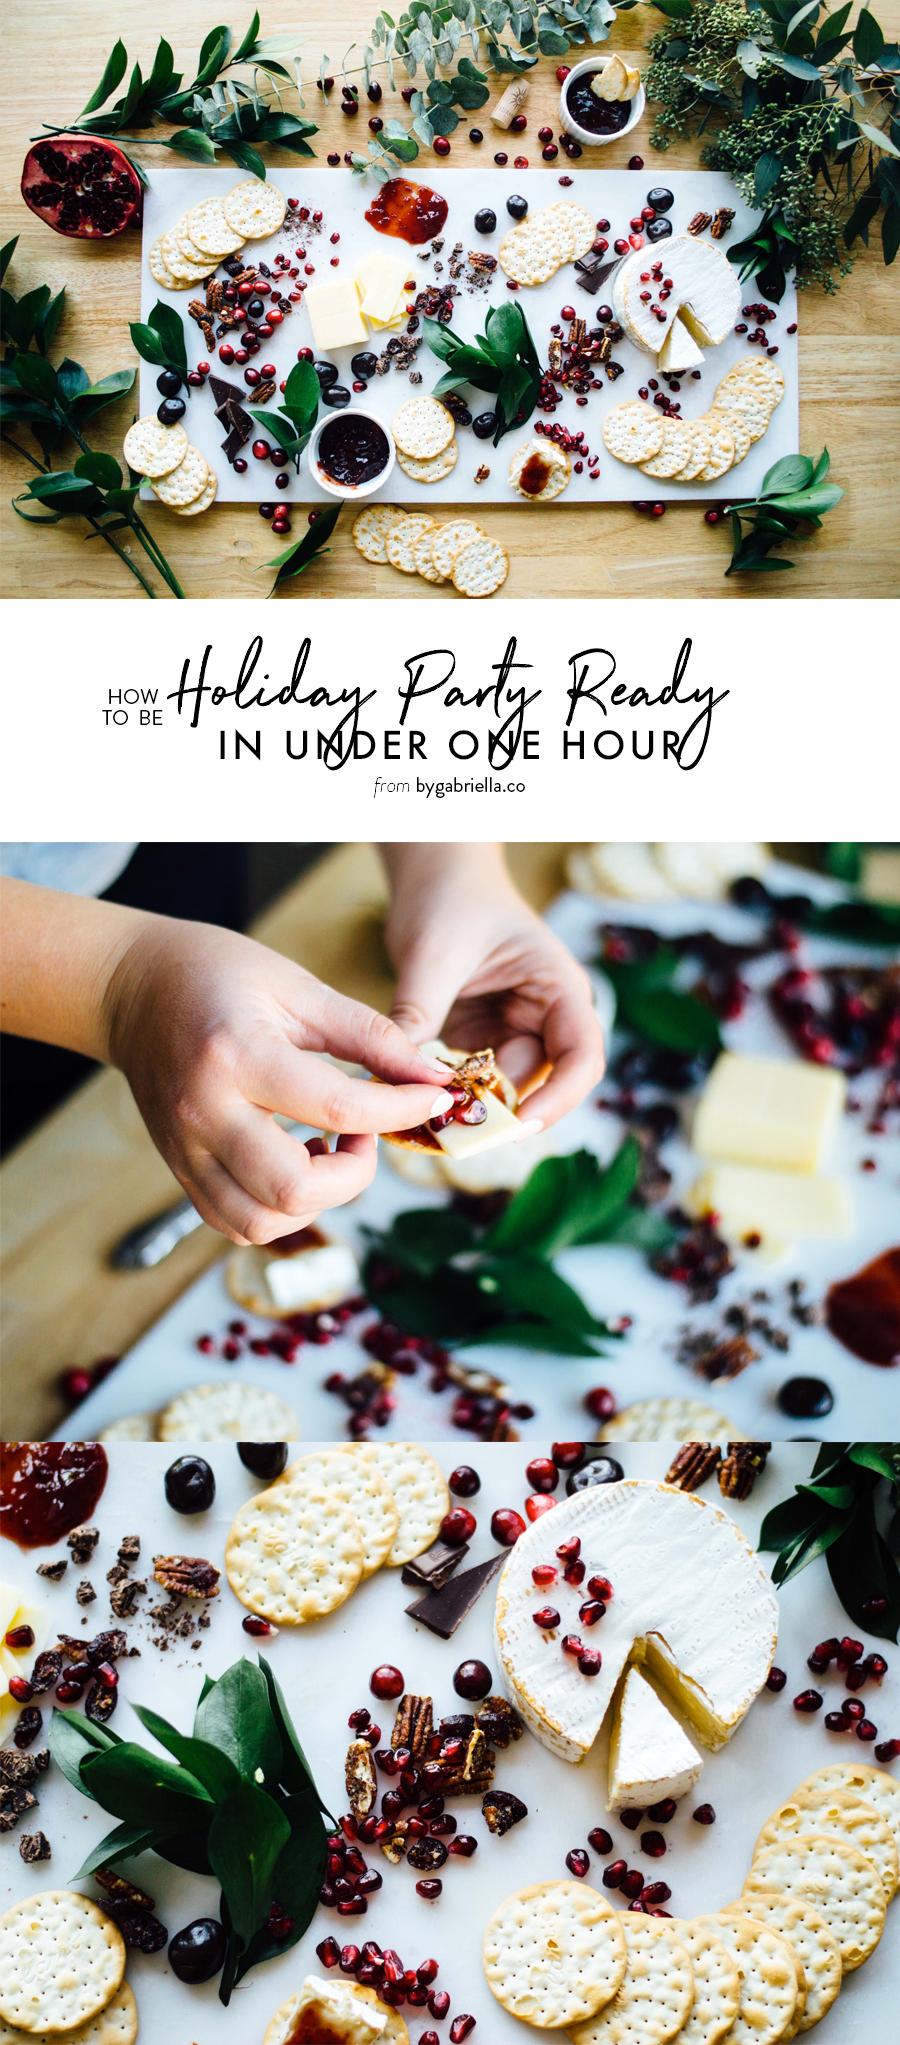 How to be holiday party ready in under 1 hour with a few quick tips & tricks from Gabi Valladares | bygabriella.co @gabivalladares